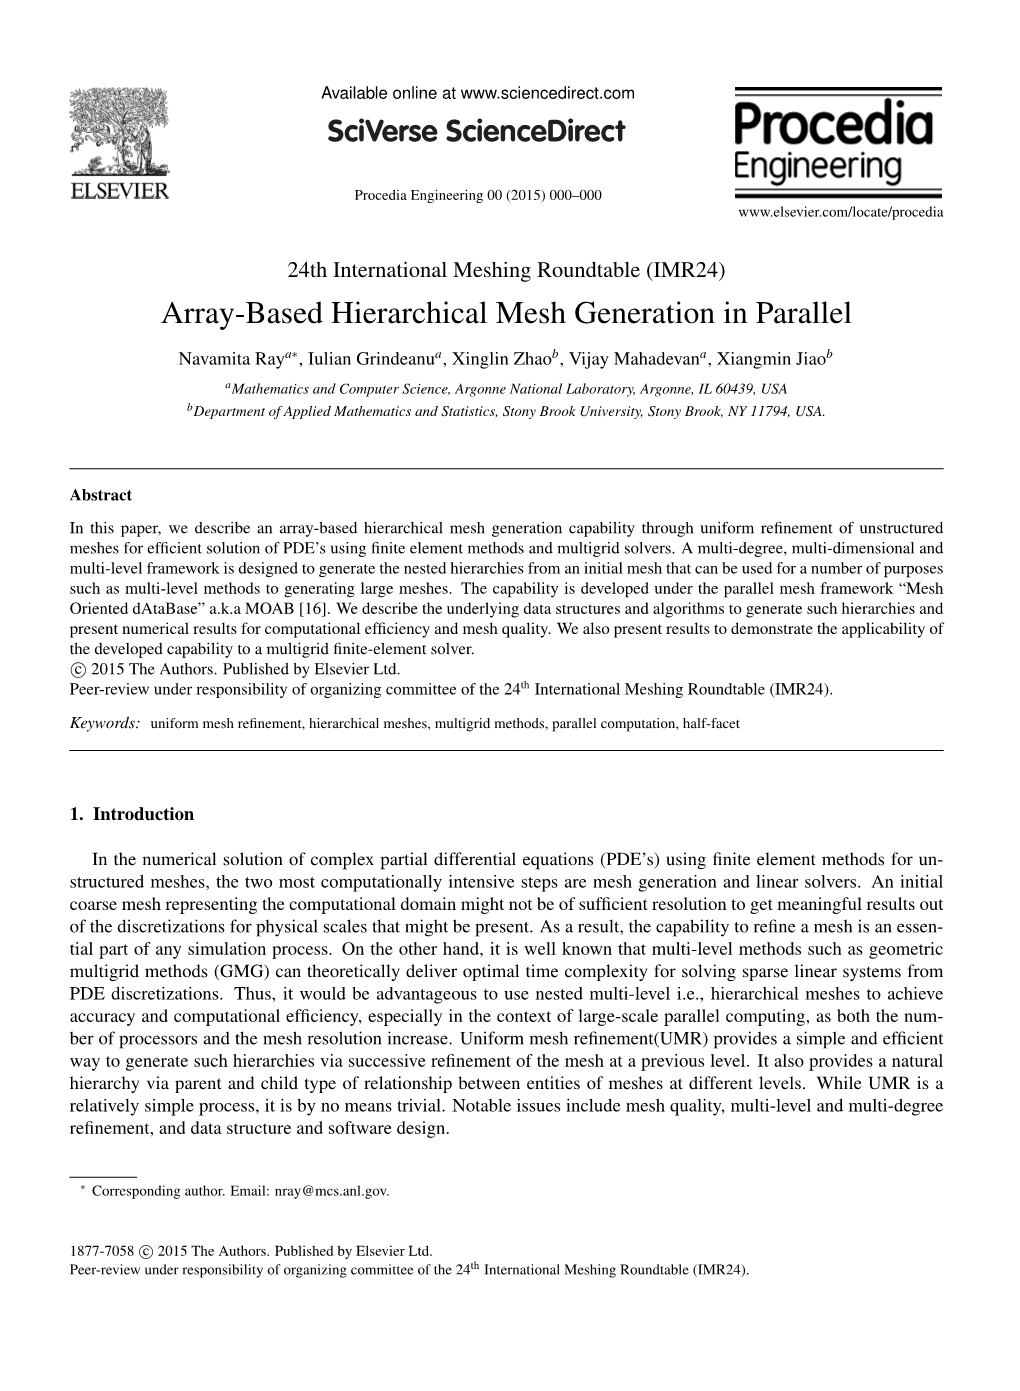 Array-Based Hierarchical Mesh Generation in Parallel